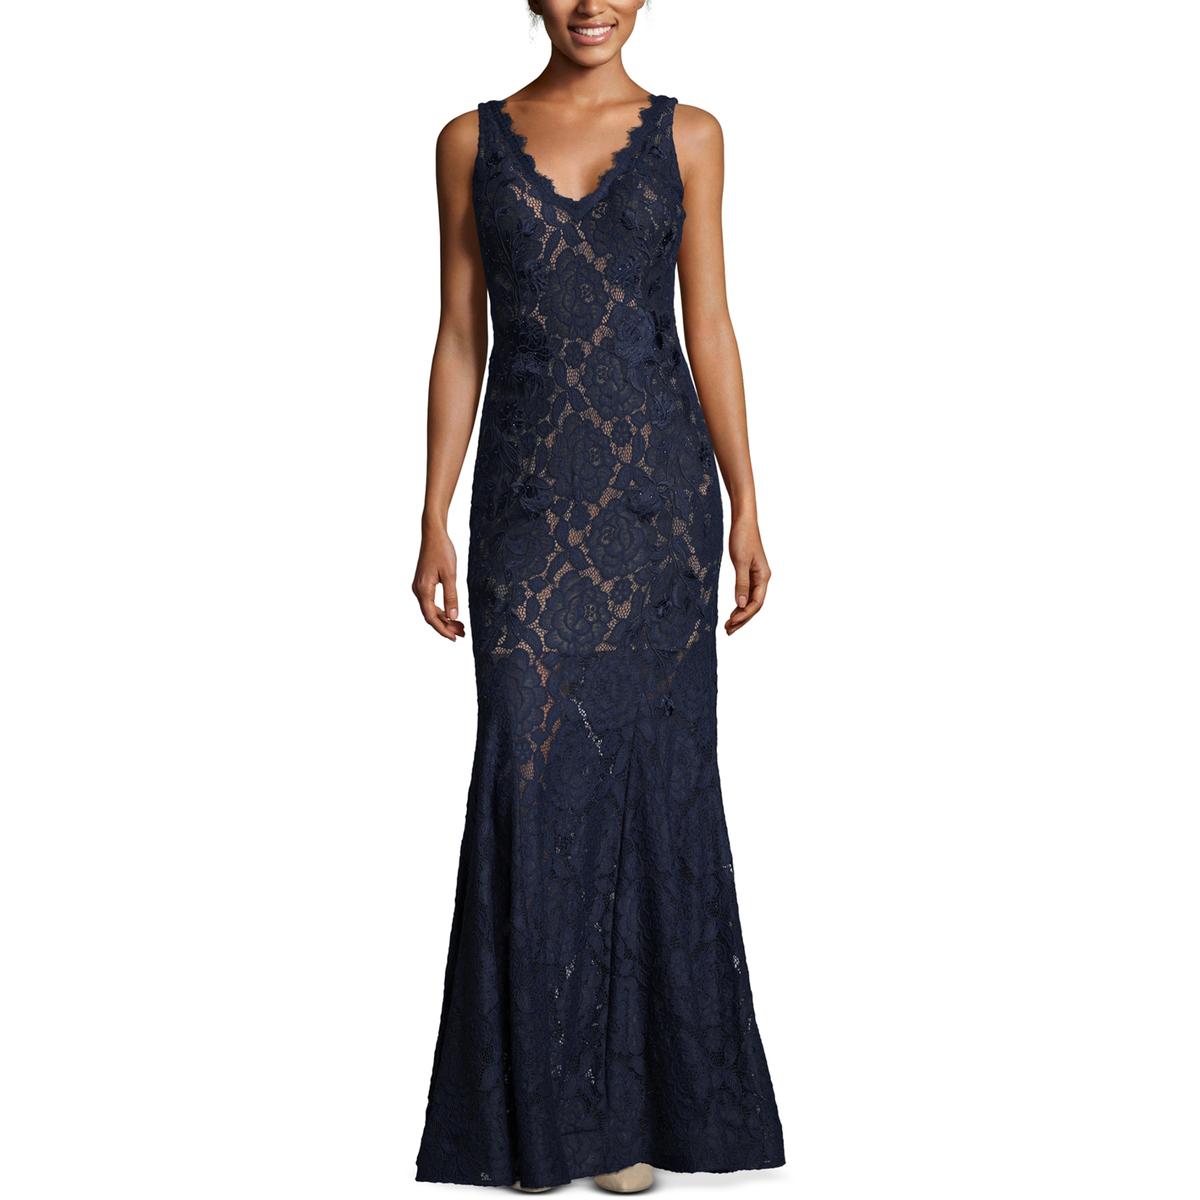 Betsy & Adam Womens Navy Lace Embroidered Evening Formal Dress Gown 6